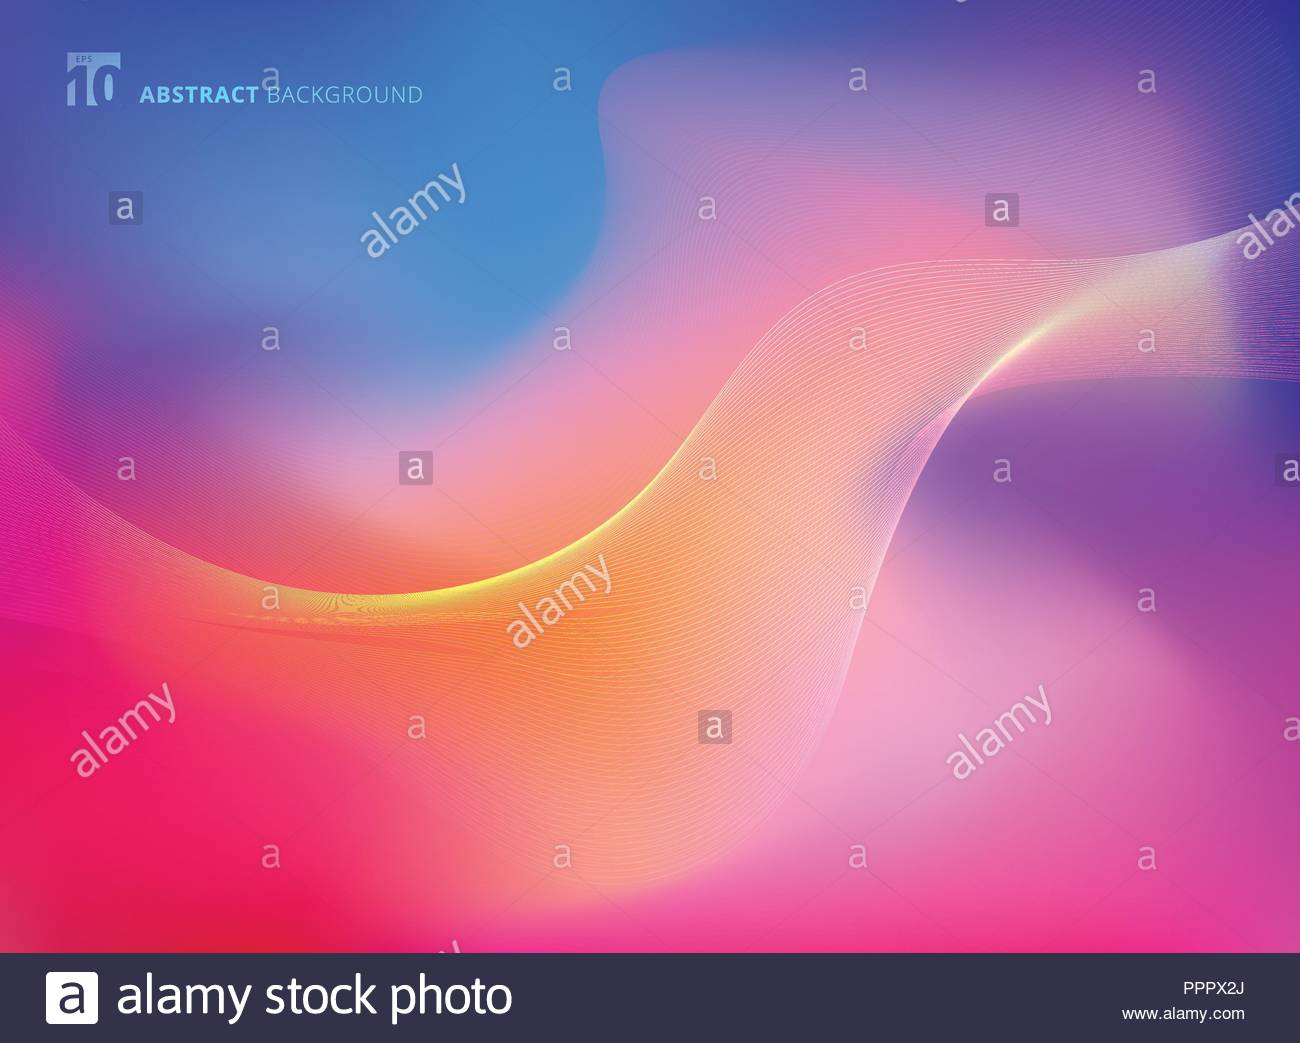 Abstract Colorful Blurred Background With Smooth Lines Curve In